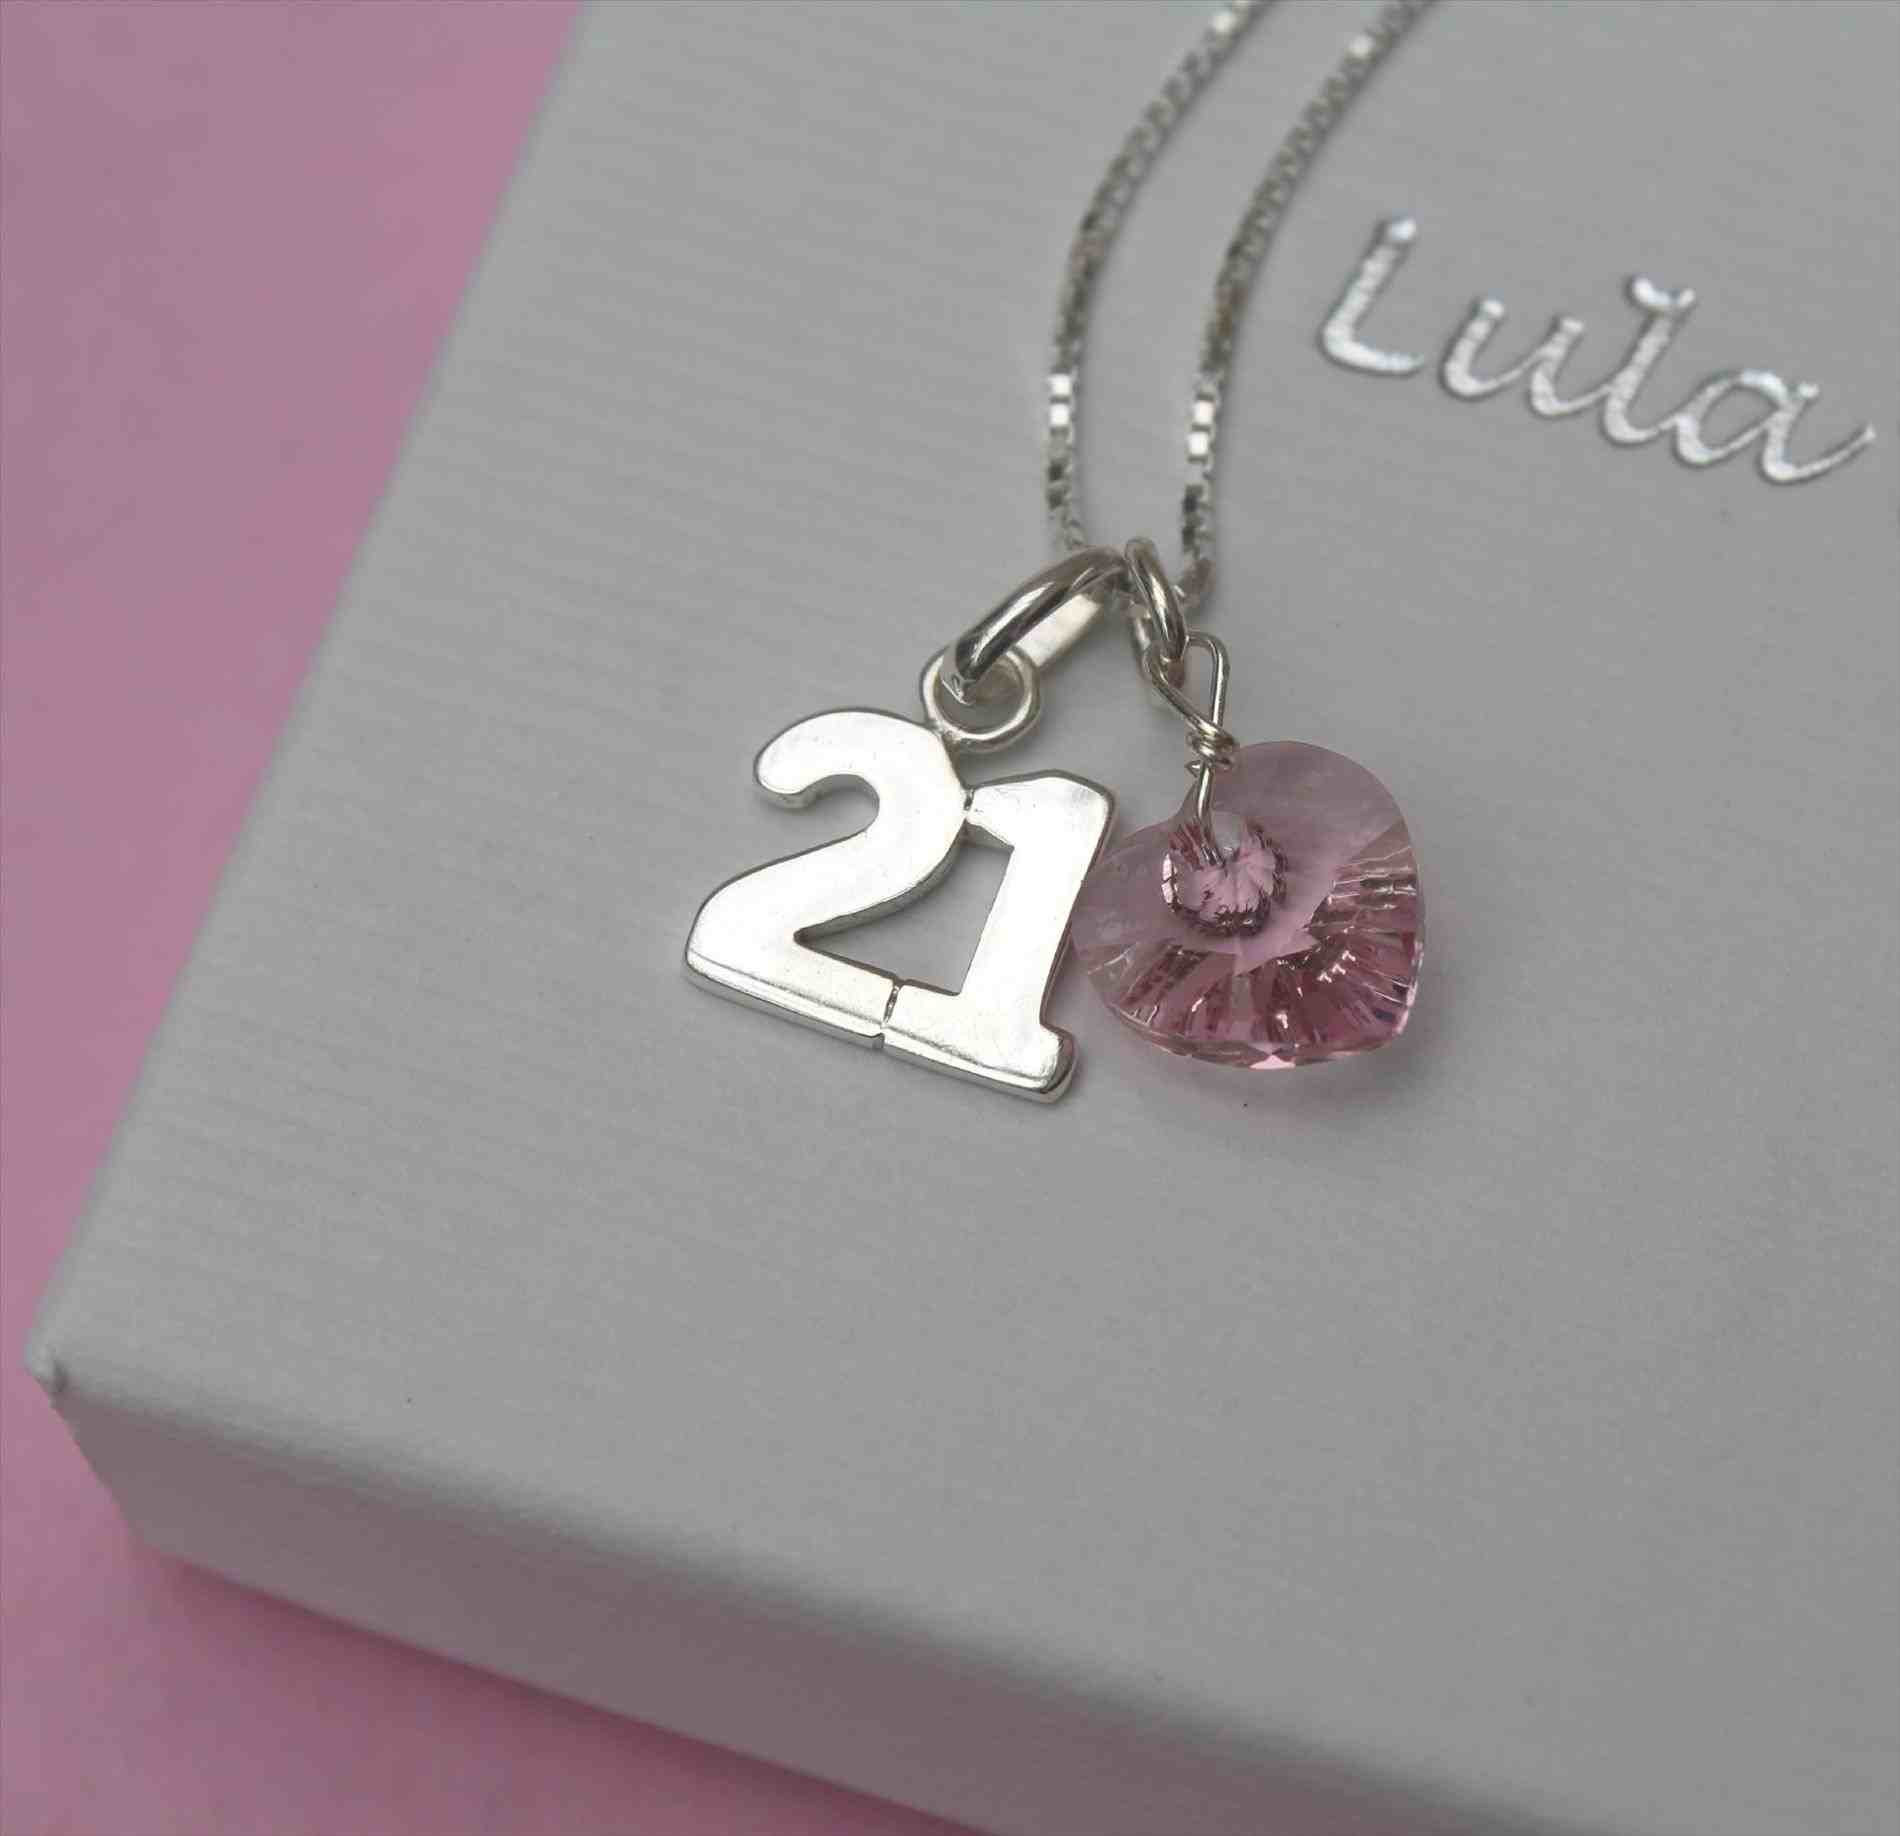 21St Birthday Gift Ideas For Daughter
 More About 21st birthday t ideas for daughter Update